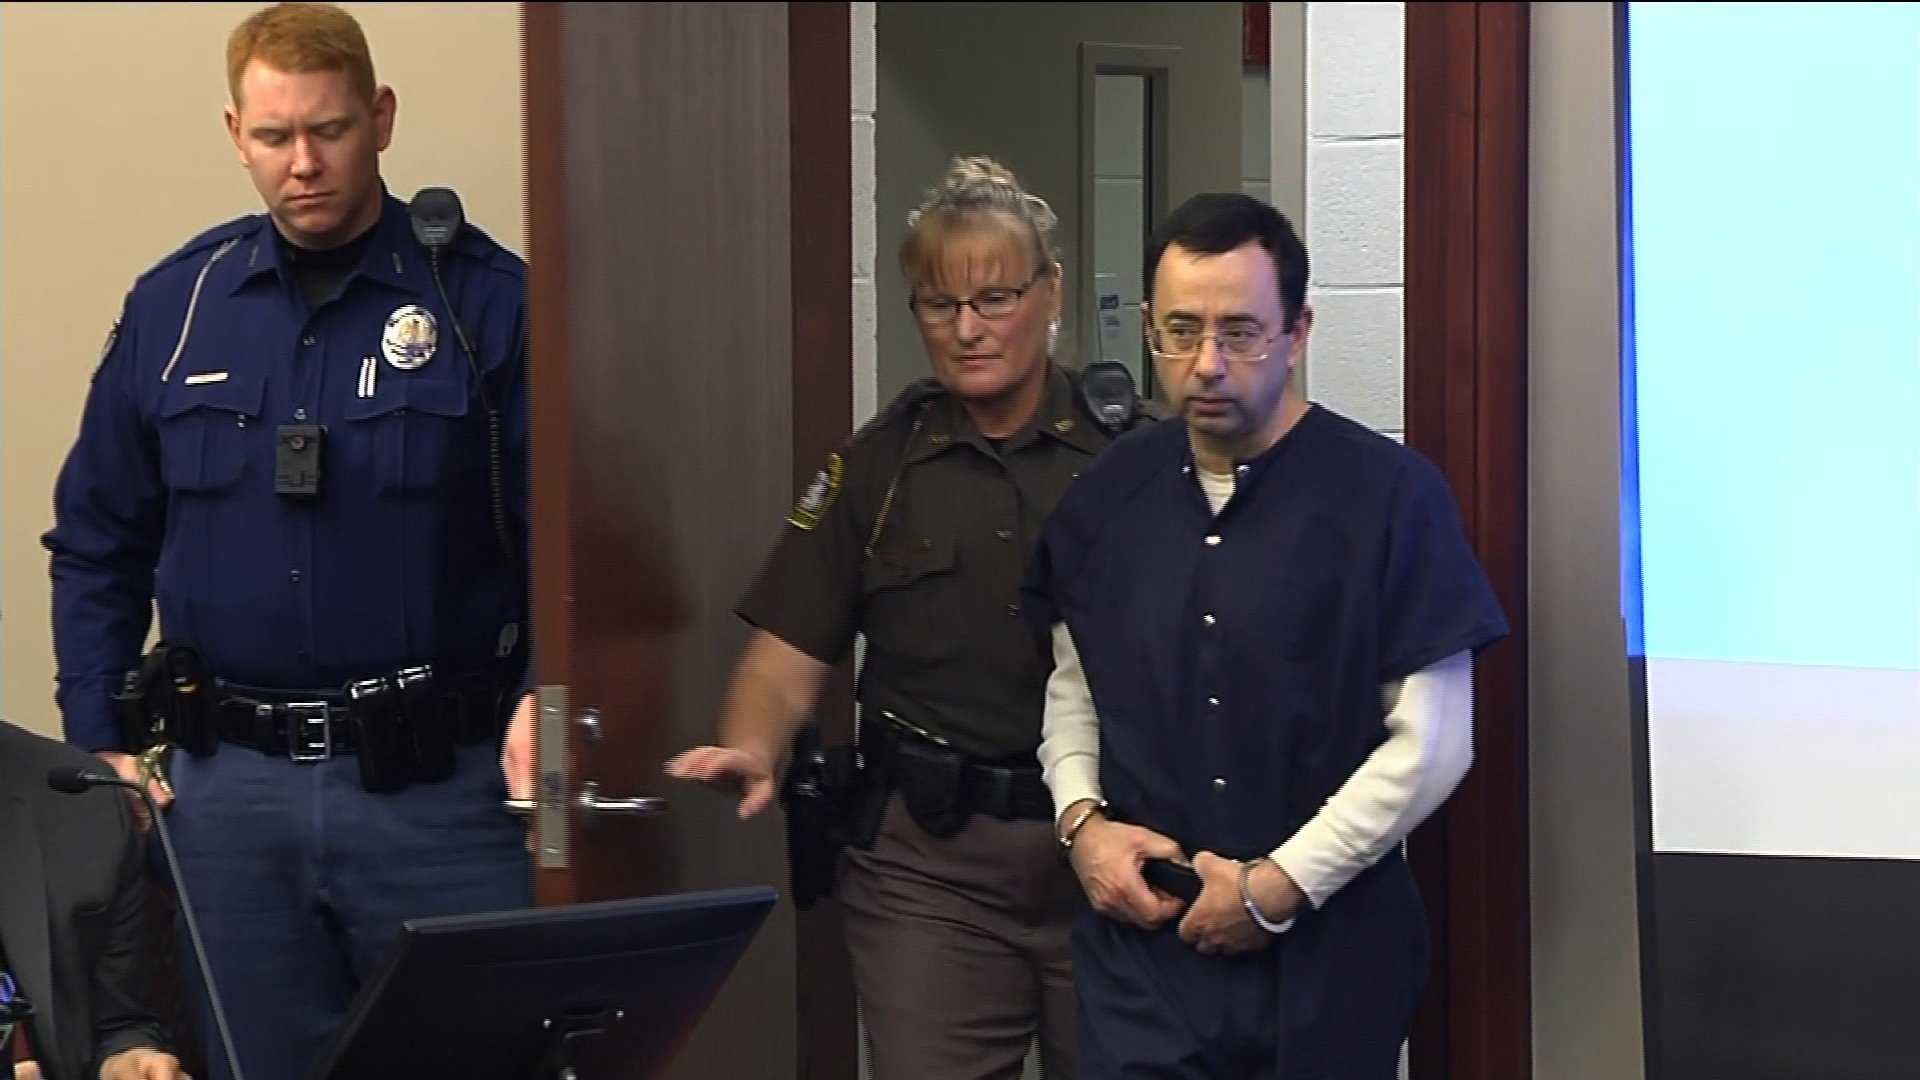 163 victim impact statements later, Larry Nassar's fate will be revealed